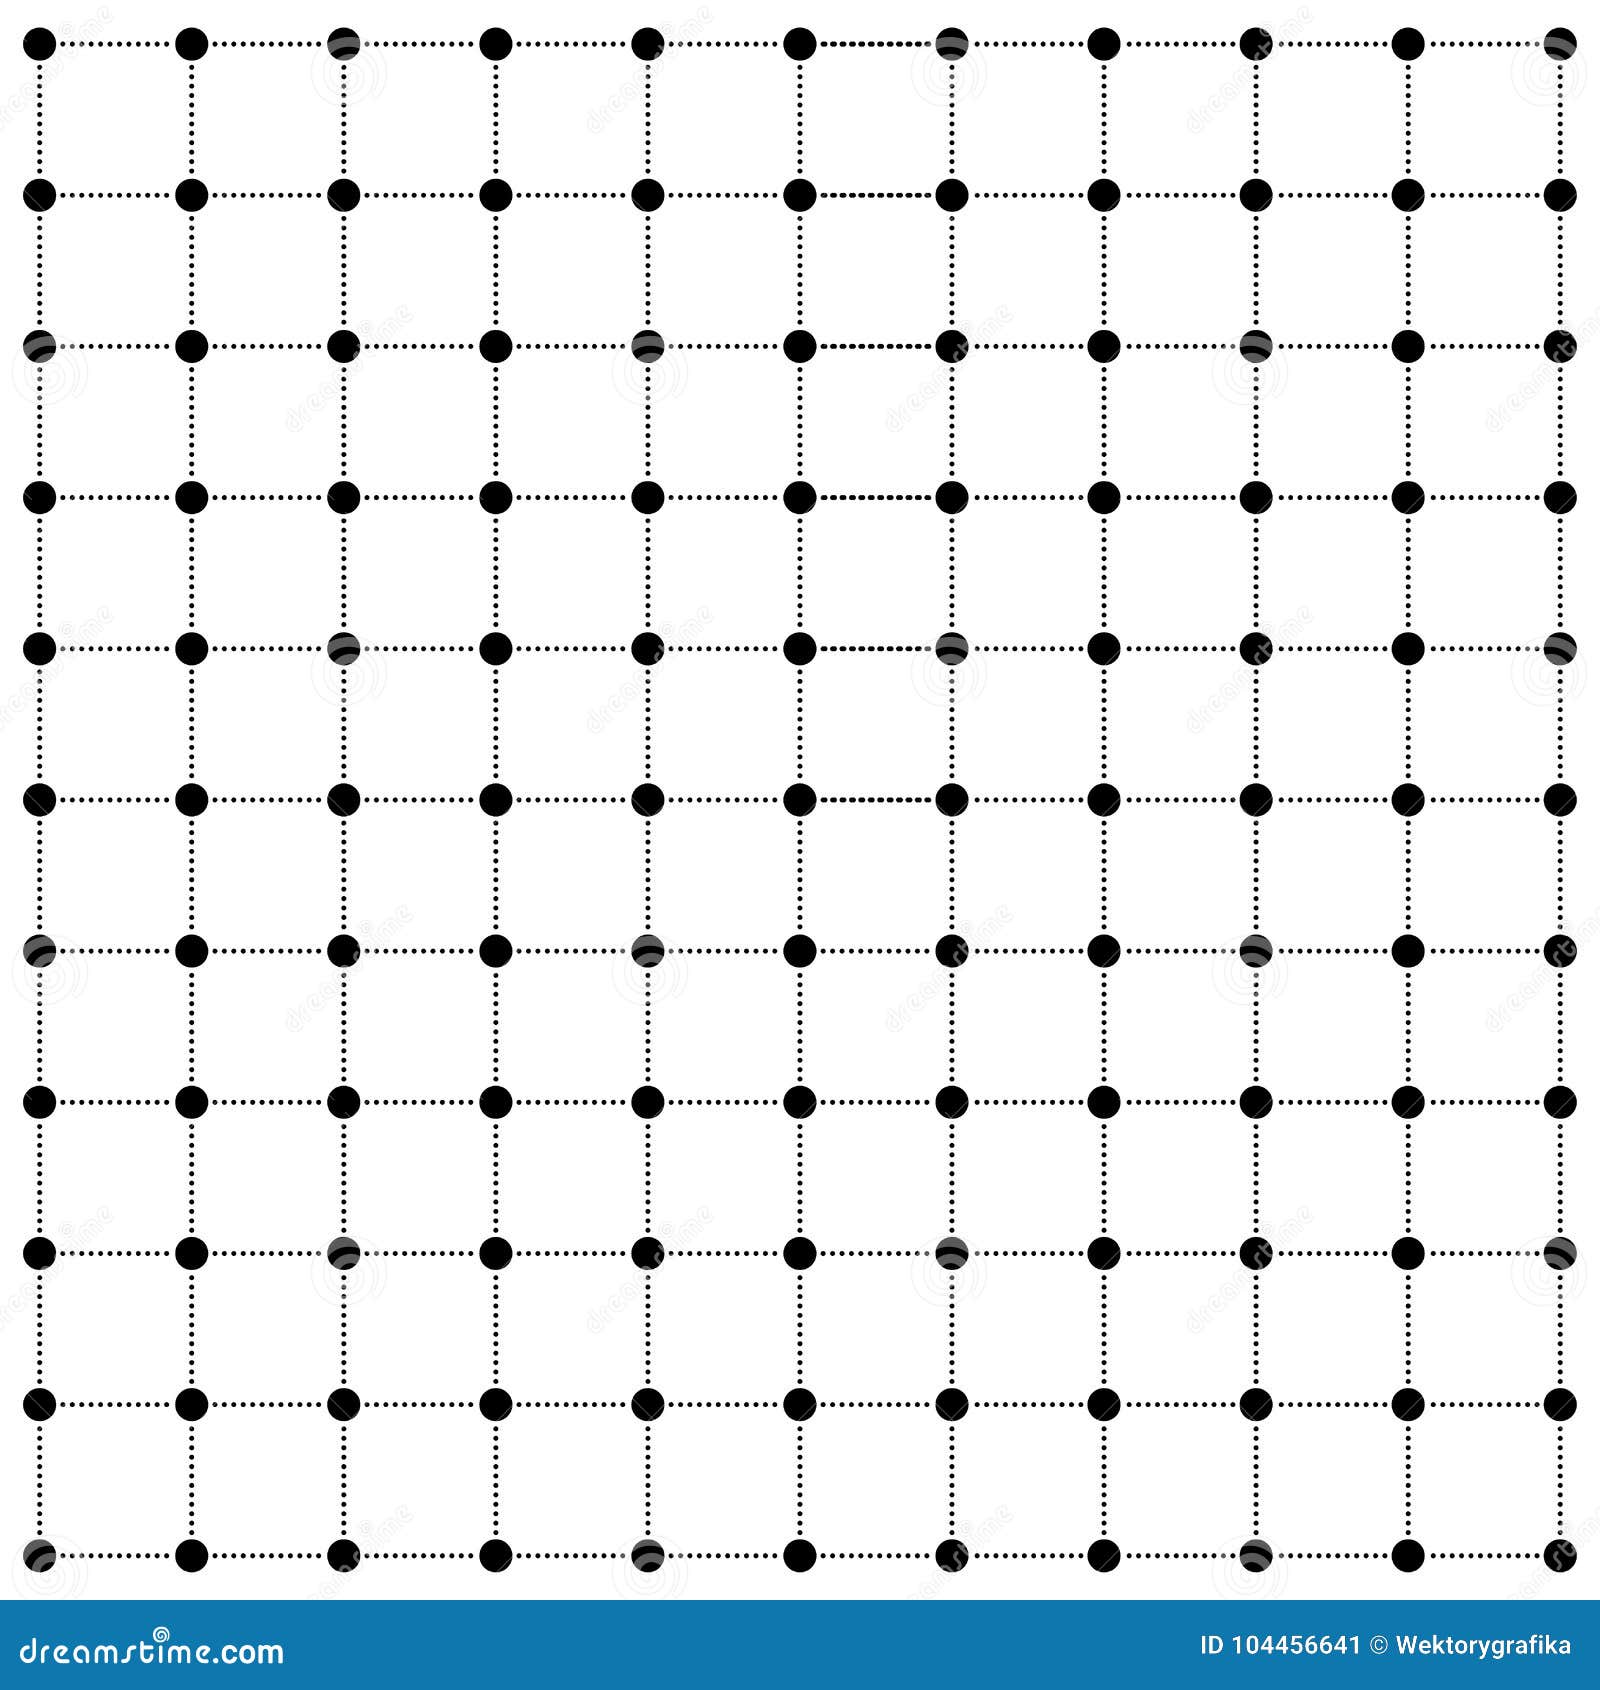 Albums 91+ Images a ____ graphic is composed of a grid of dots. Excellent